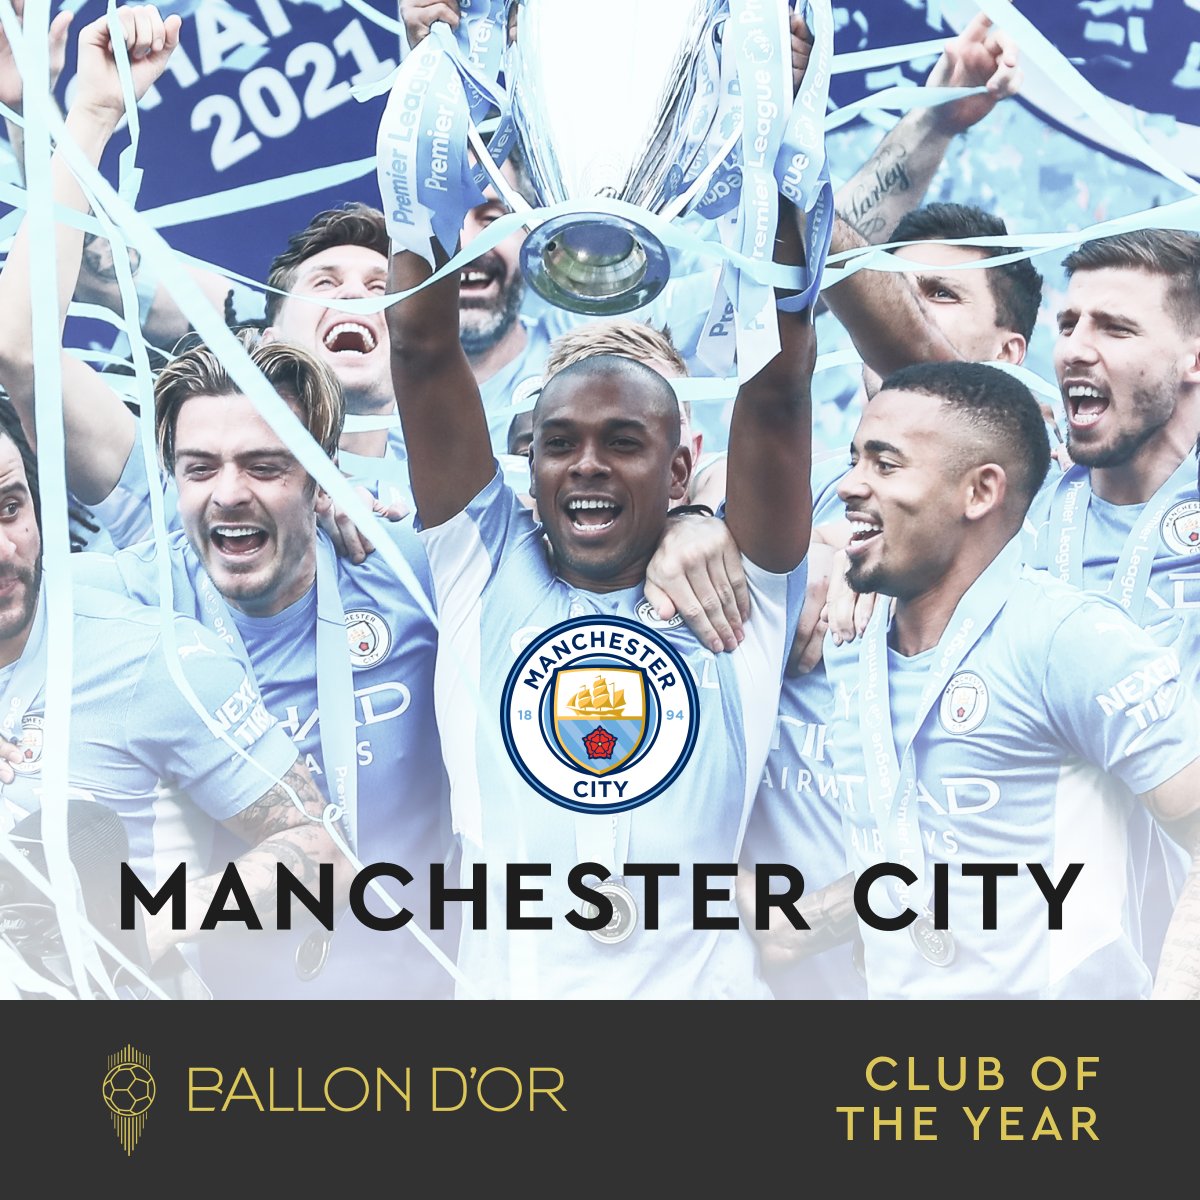 Manchester City is the club of the year! Congrats @ManCity 💙 #clubdelannée #ballondor